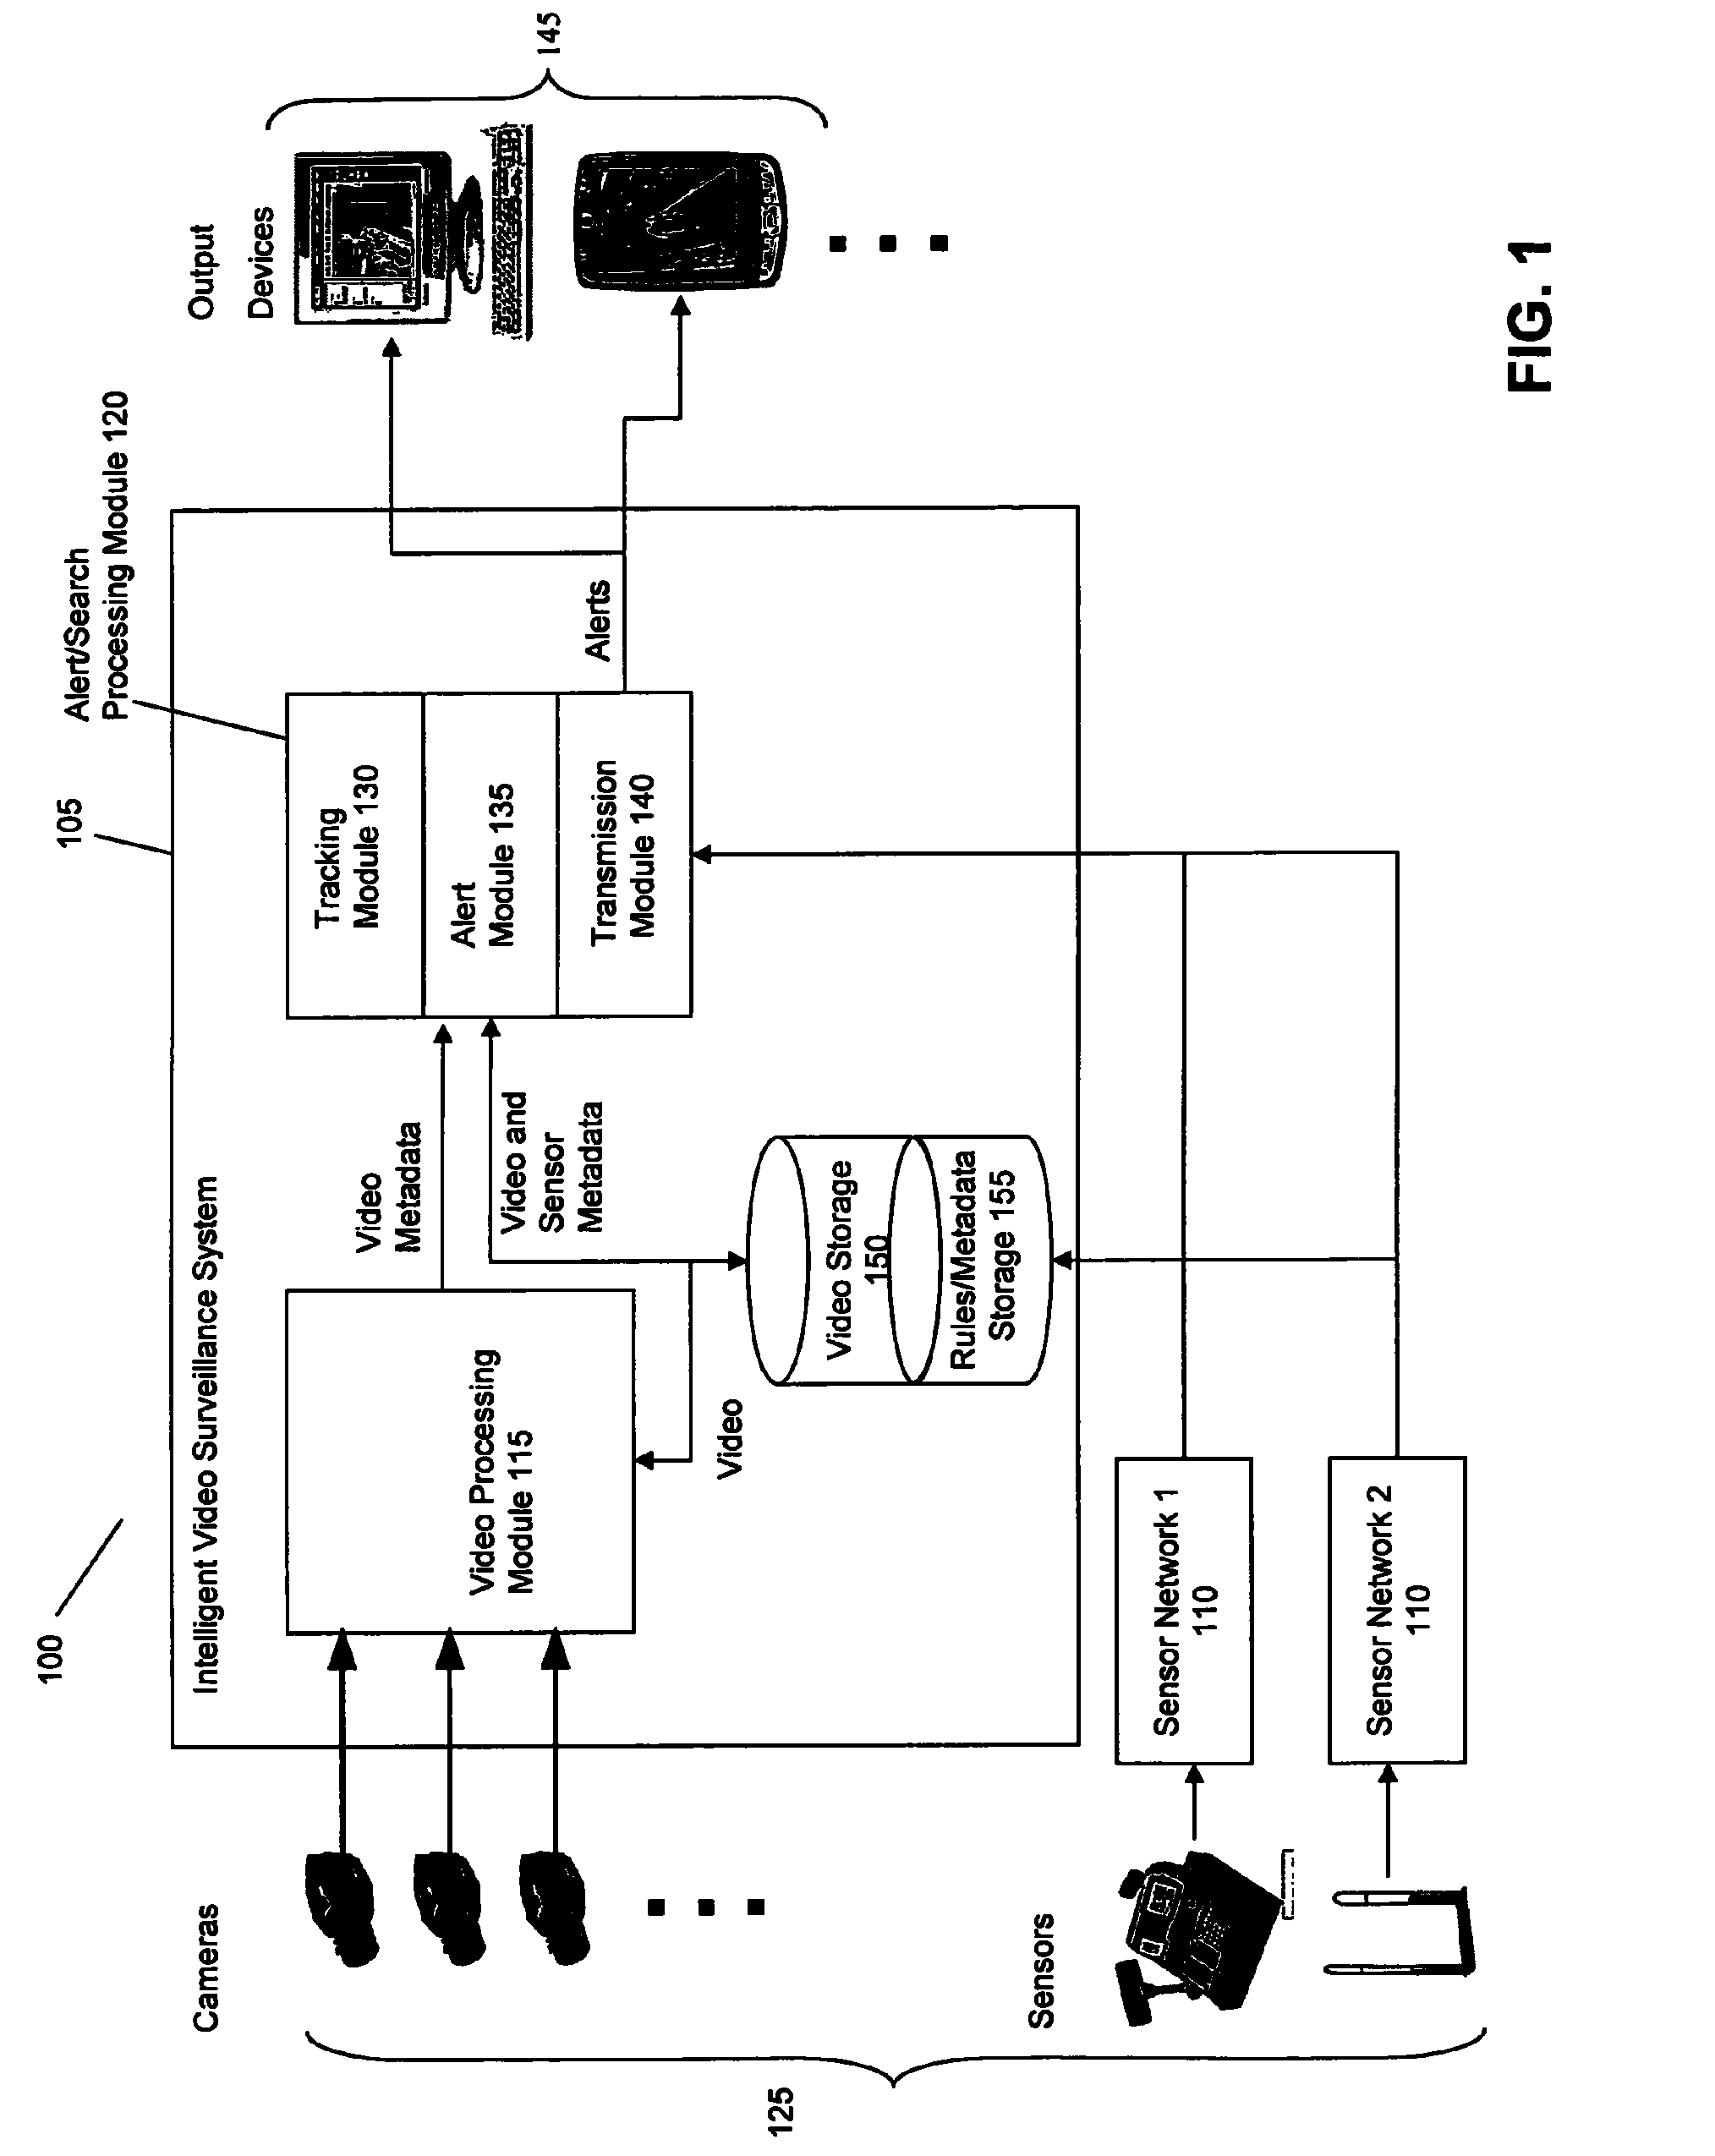 Systems and methods for distributed monitoring of remote sites